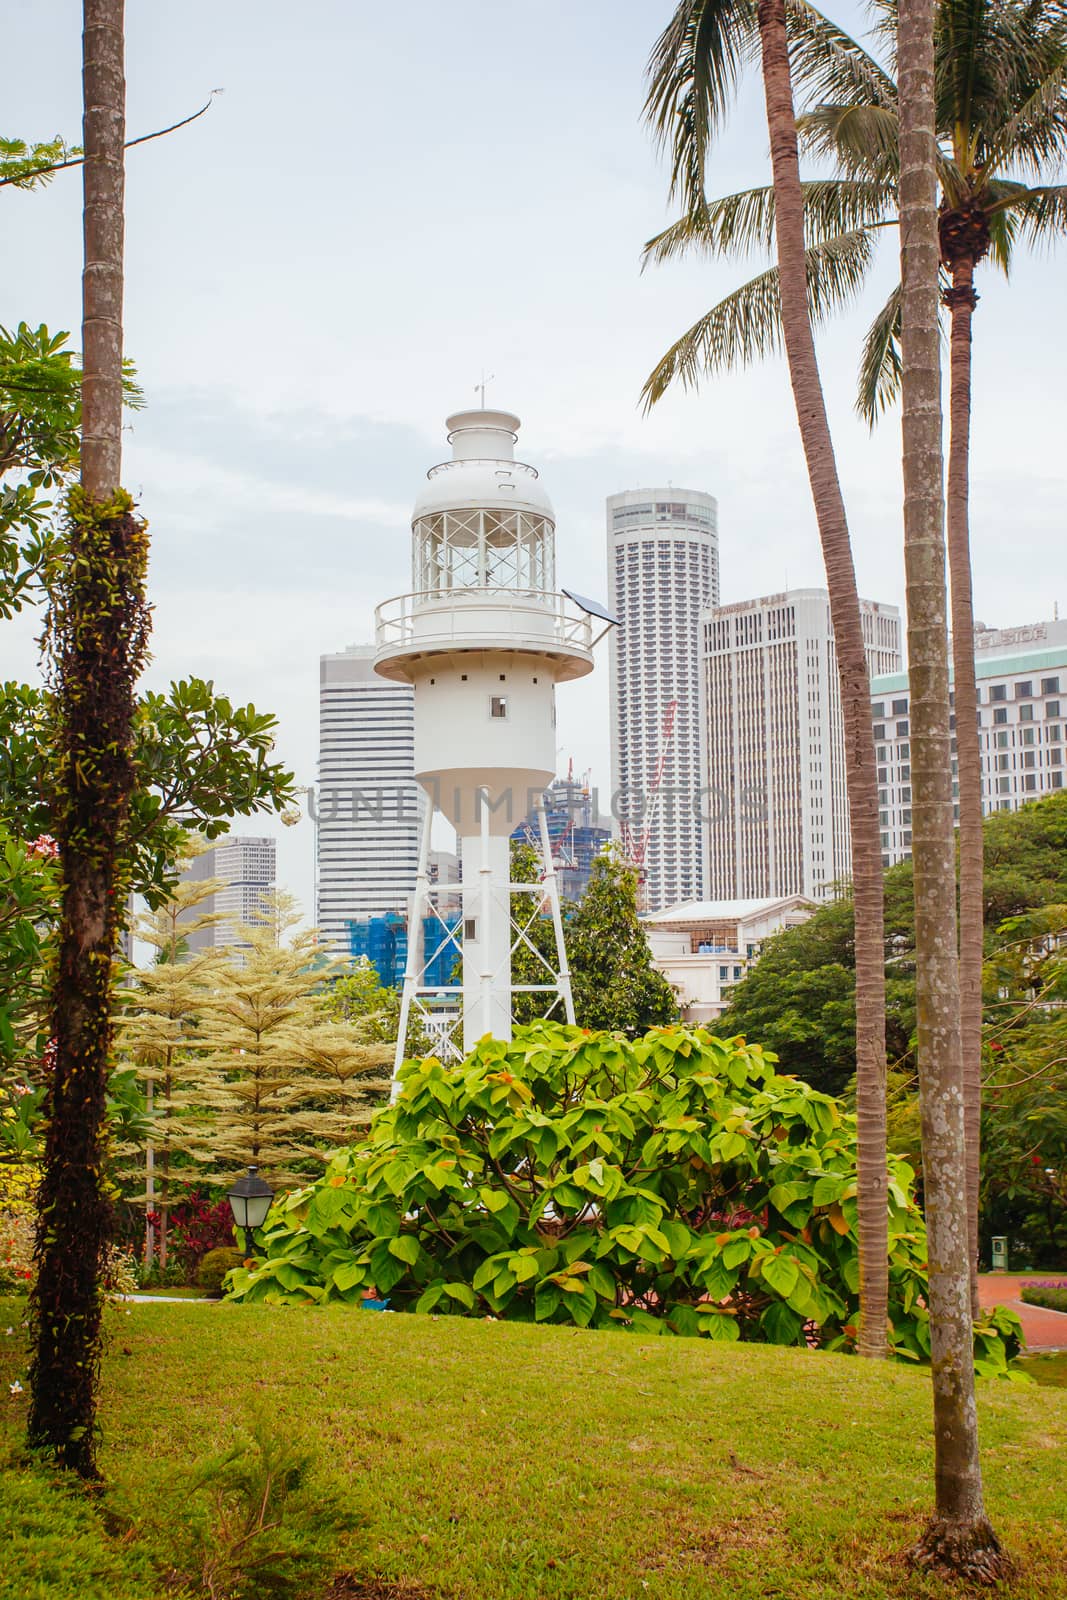 Fort Canning Lighthouse in Fort Canning Park in Singapore City on a warm humid morning.